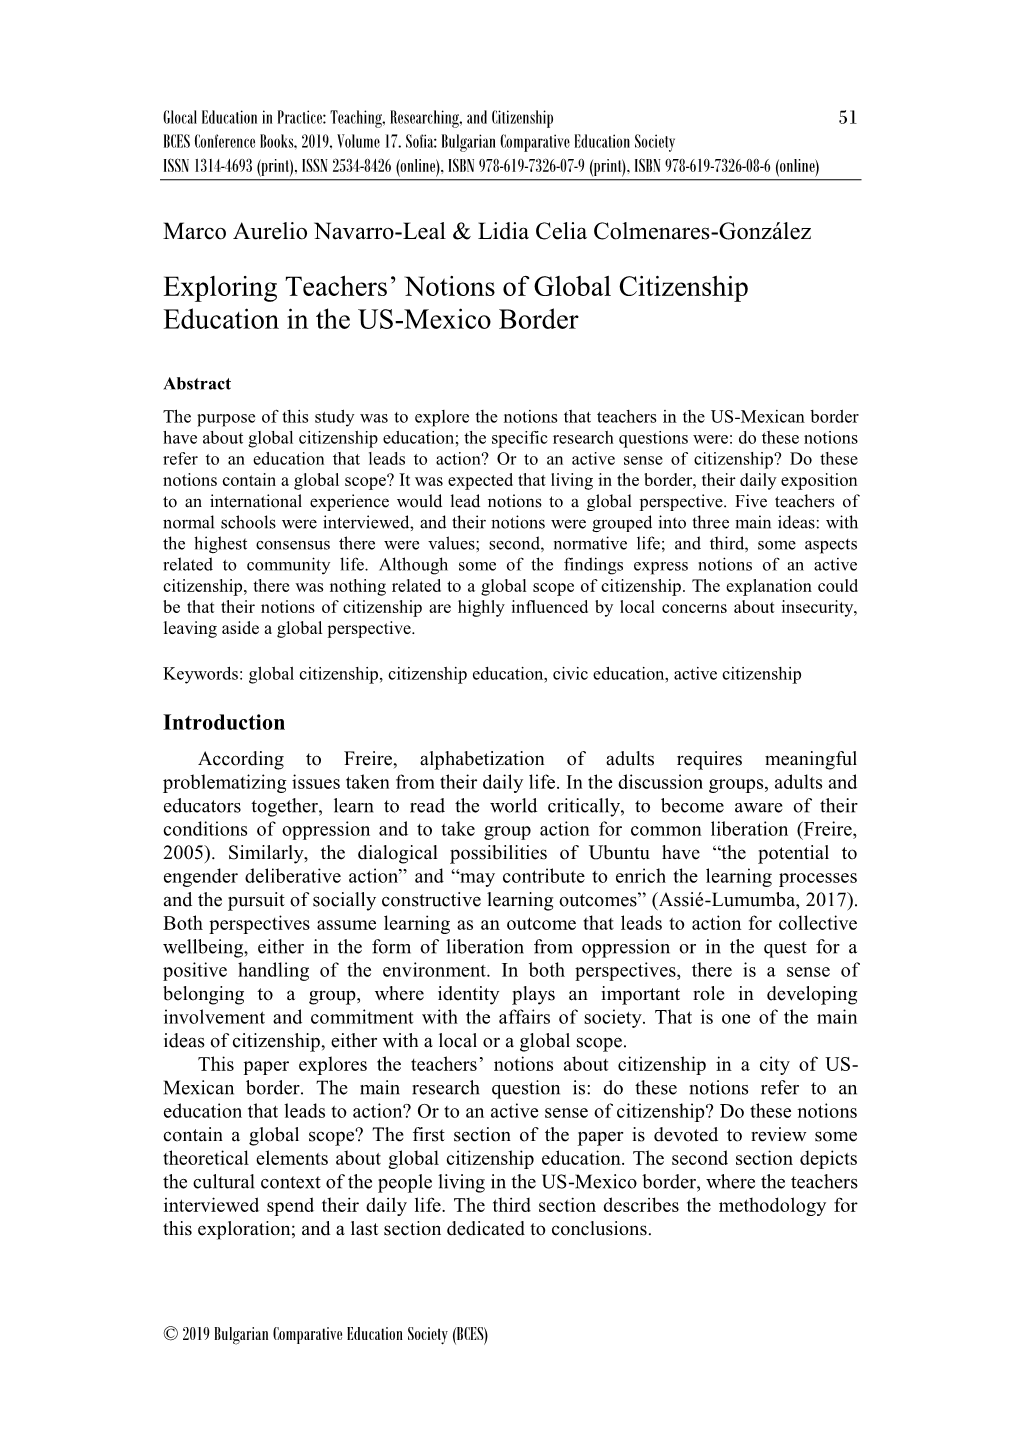 Exploring Teachers' Notions of Global Citizenship Education in the US-Mexico Border